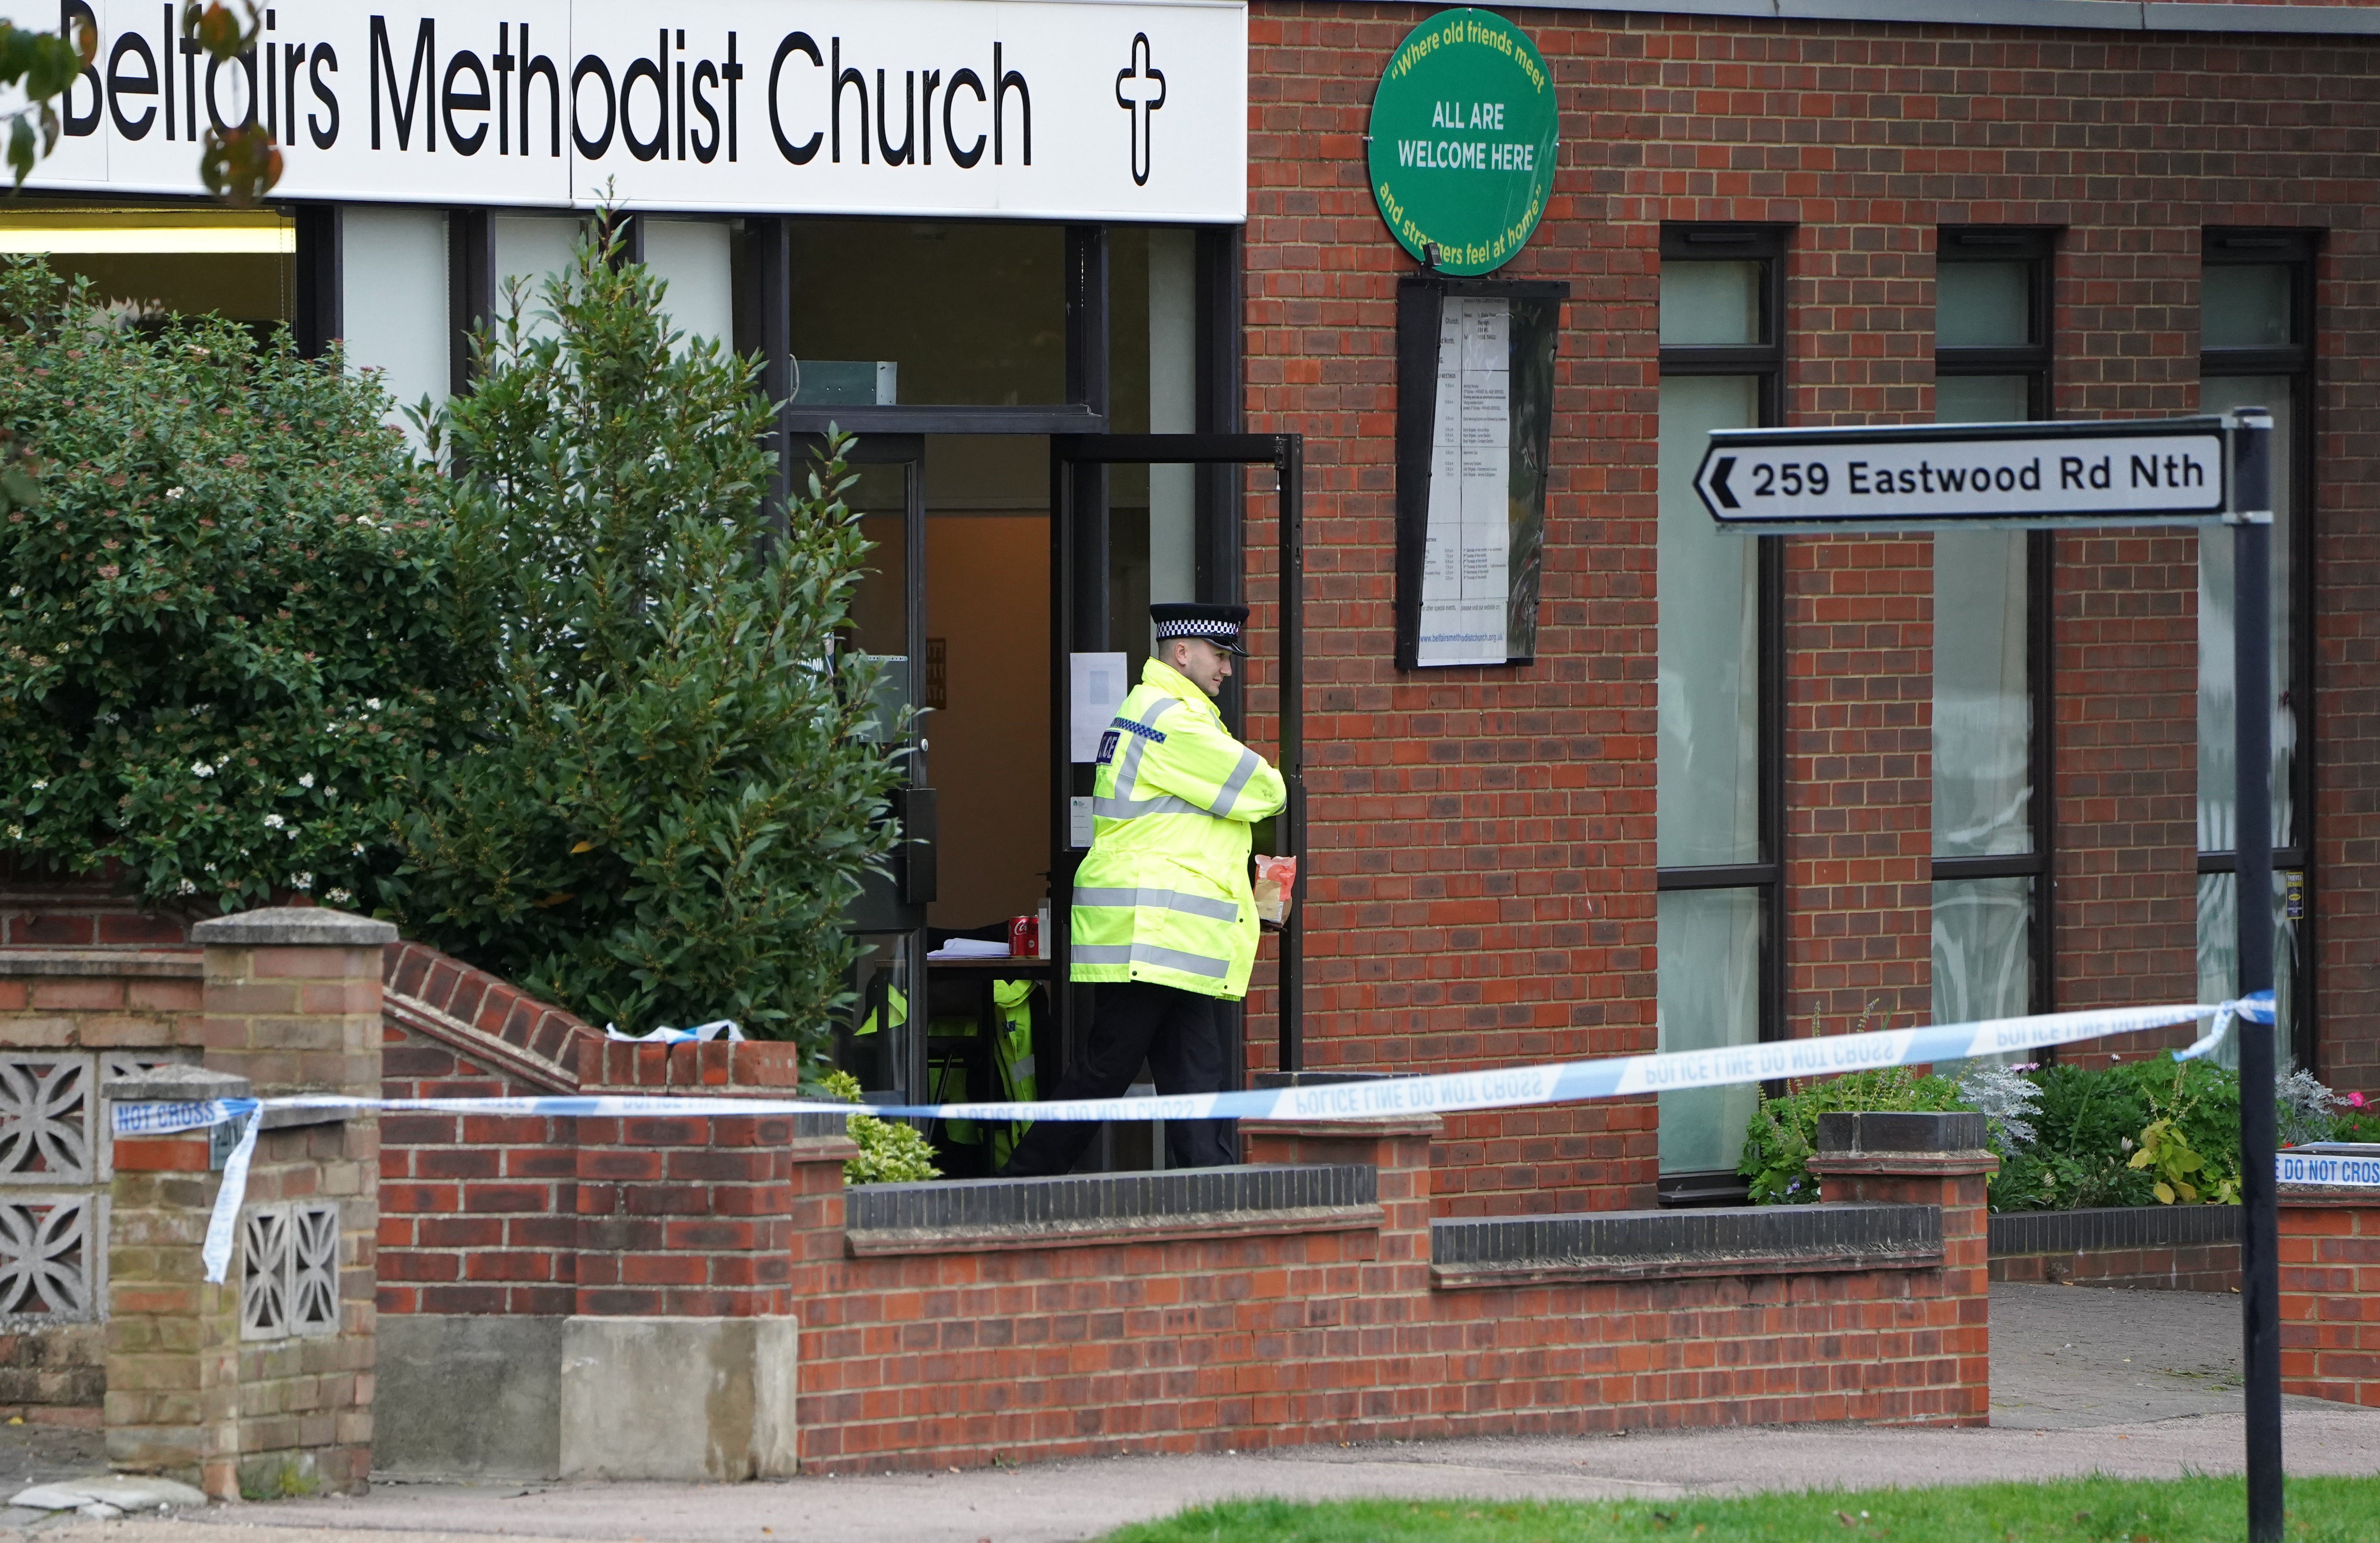 Belfairs Methodist Church in Eastwood Road North, Leigh-on-Sea, Essex, where Conservative MP Sir David Amess was stabbed to death (Kirsty O’Connor/PA)